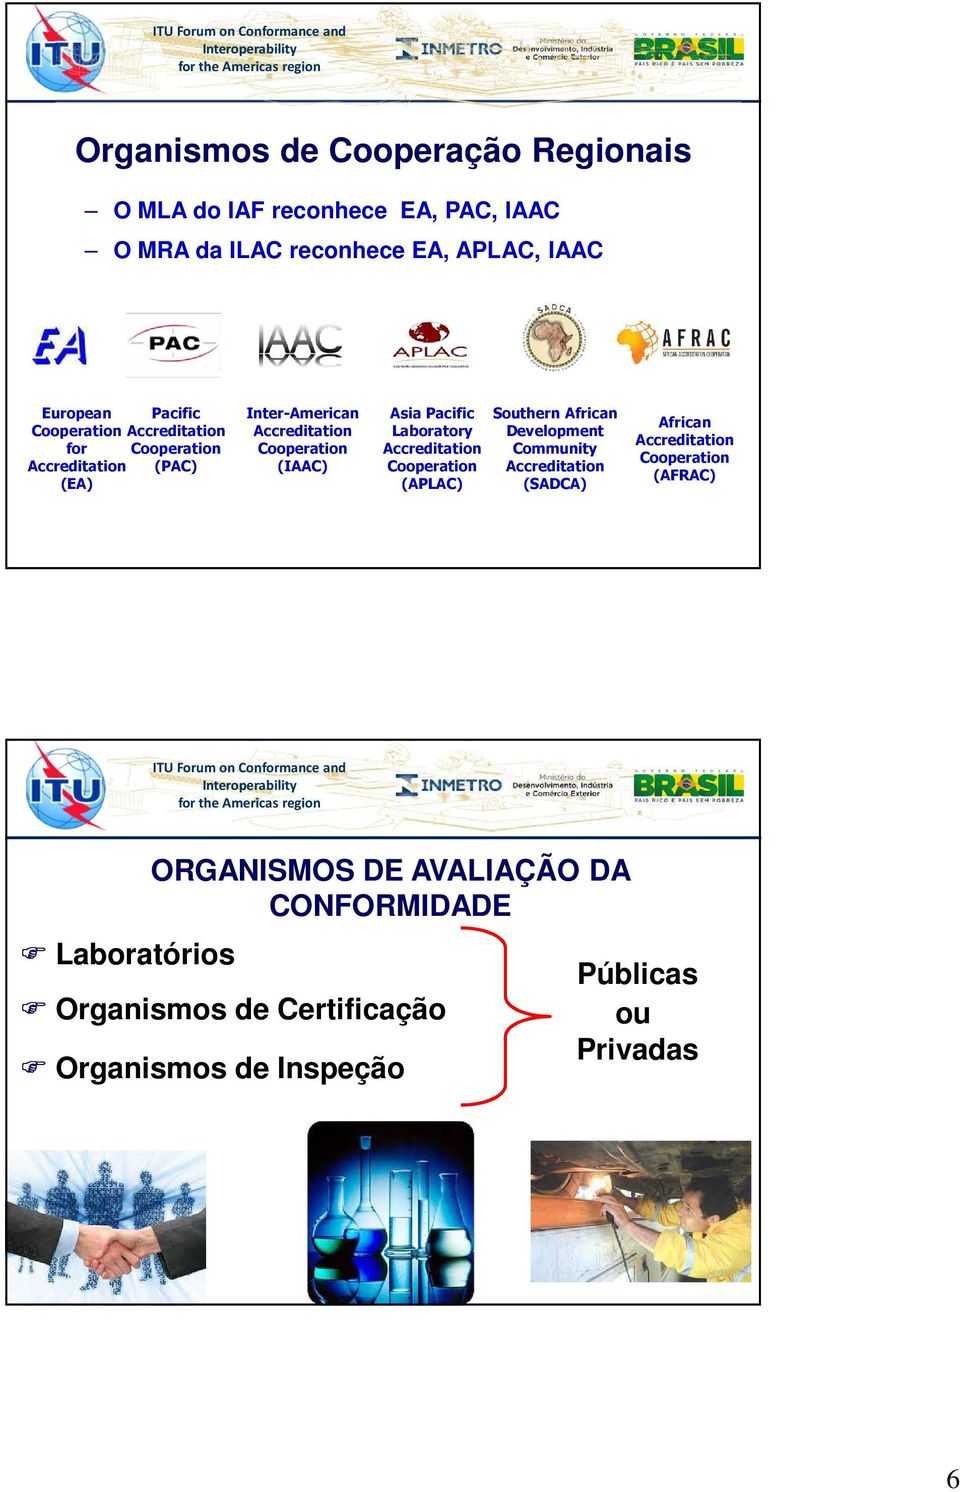 Laboratory Cooperation (APLAC) Southern African Development Community (SADCA) African Cooperation (AFRAC) 11